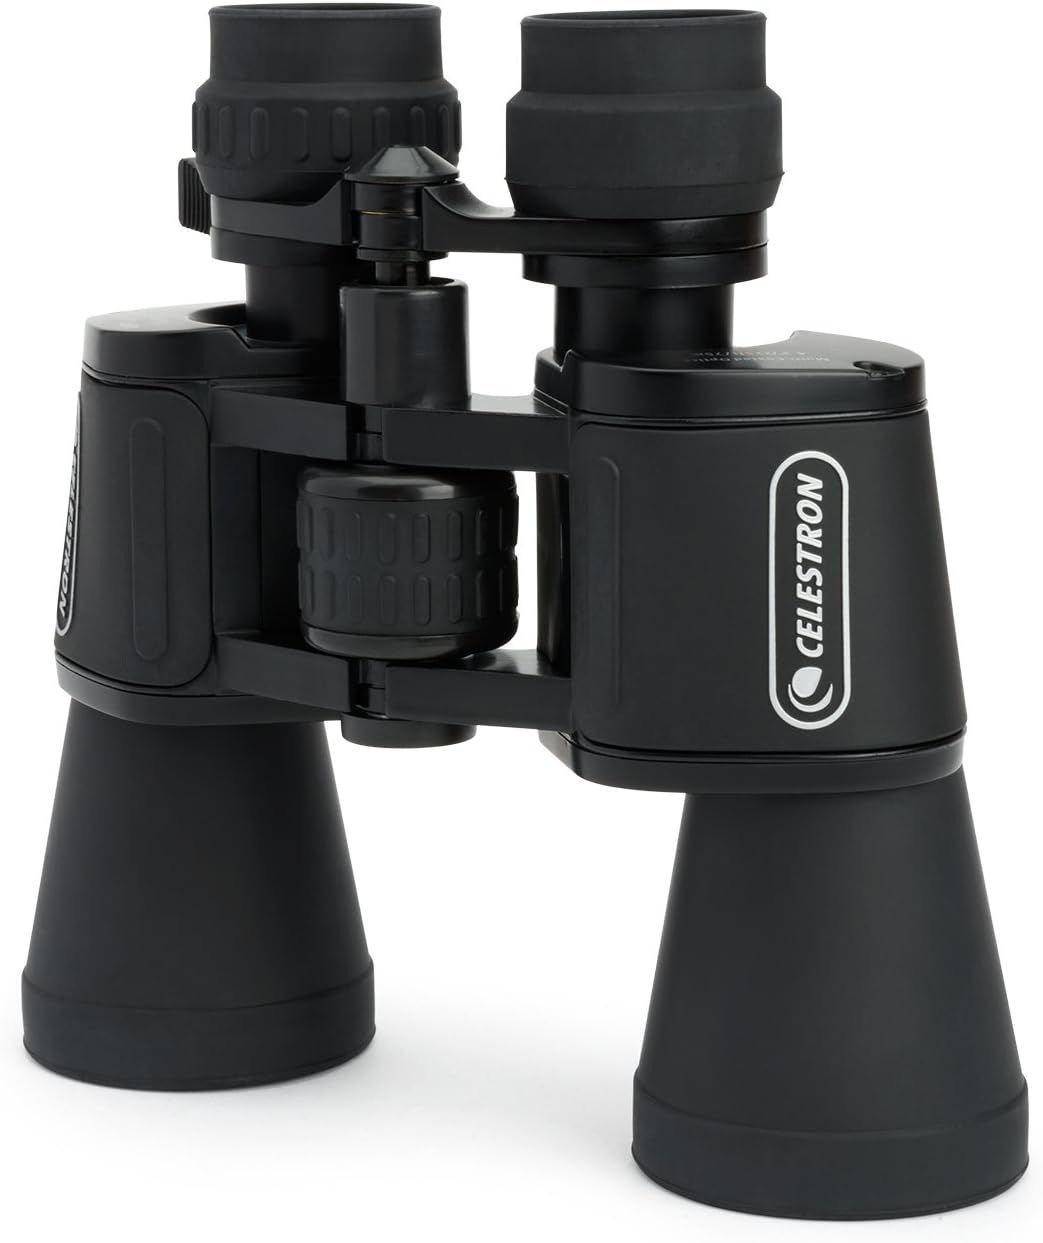 Celestron – UpClose G2 10–30x50 Binocular – 10-30x Zoom Binoculars for Beginners – Multi-coated Optics for Bird Watching, Wildlife, Scenery and Hunting – Porro Prism – Includes Soft Carrying Case